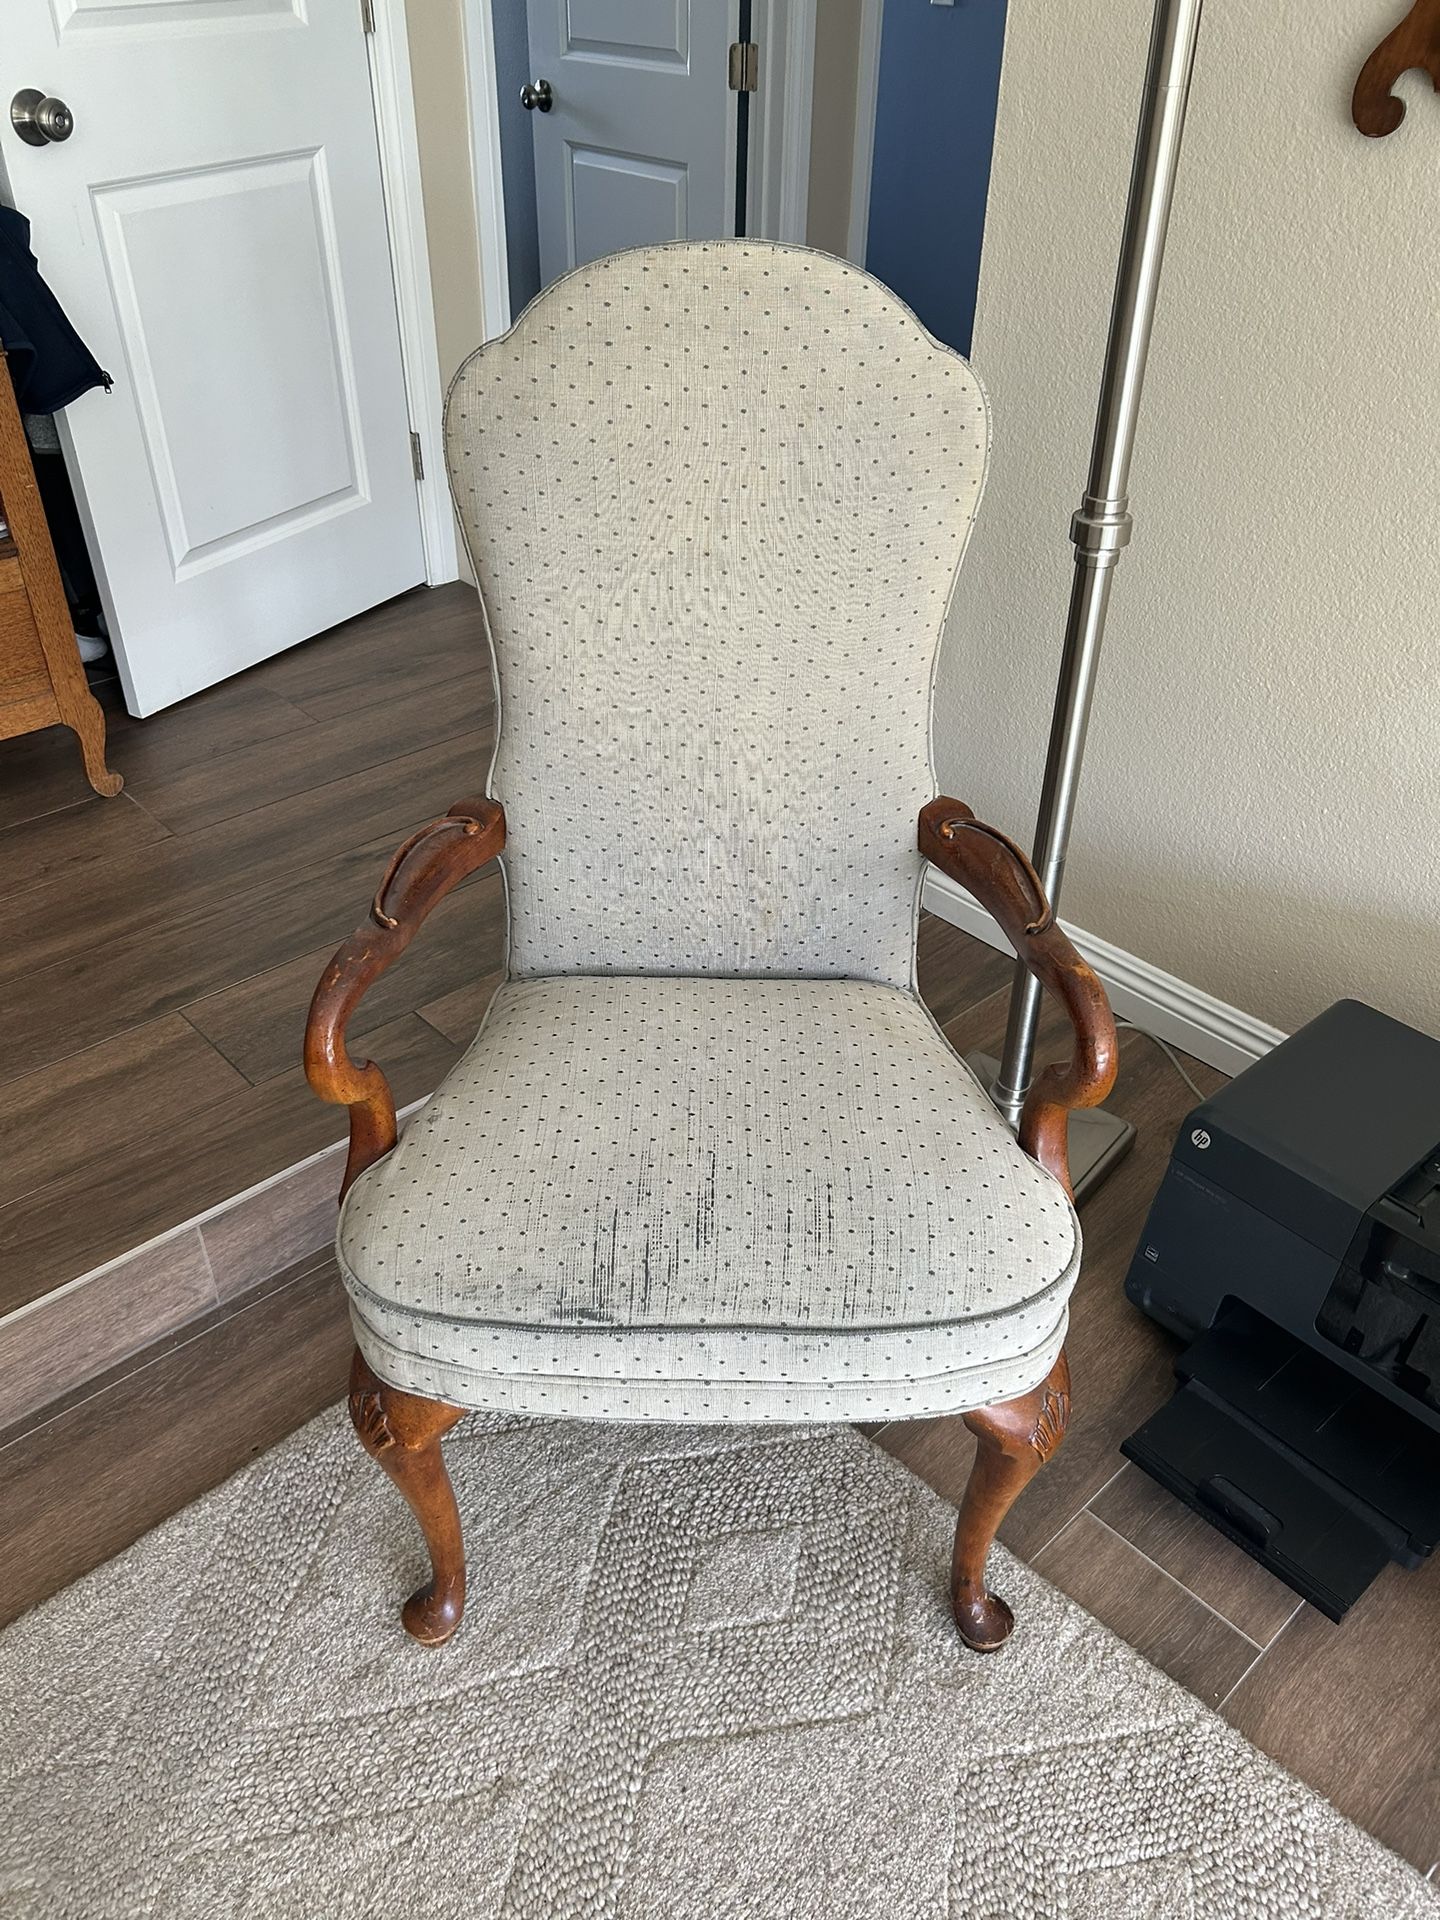 Antique Chair For Sale 